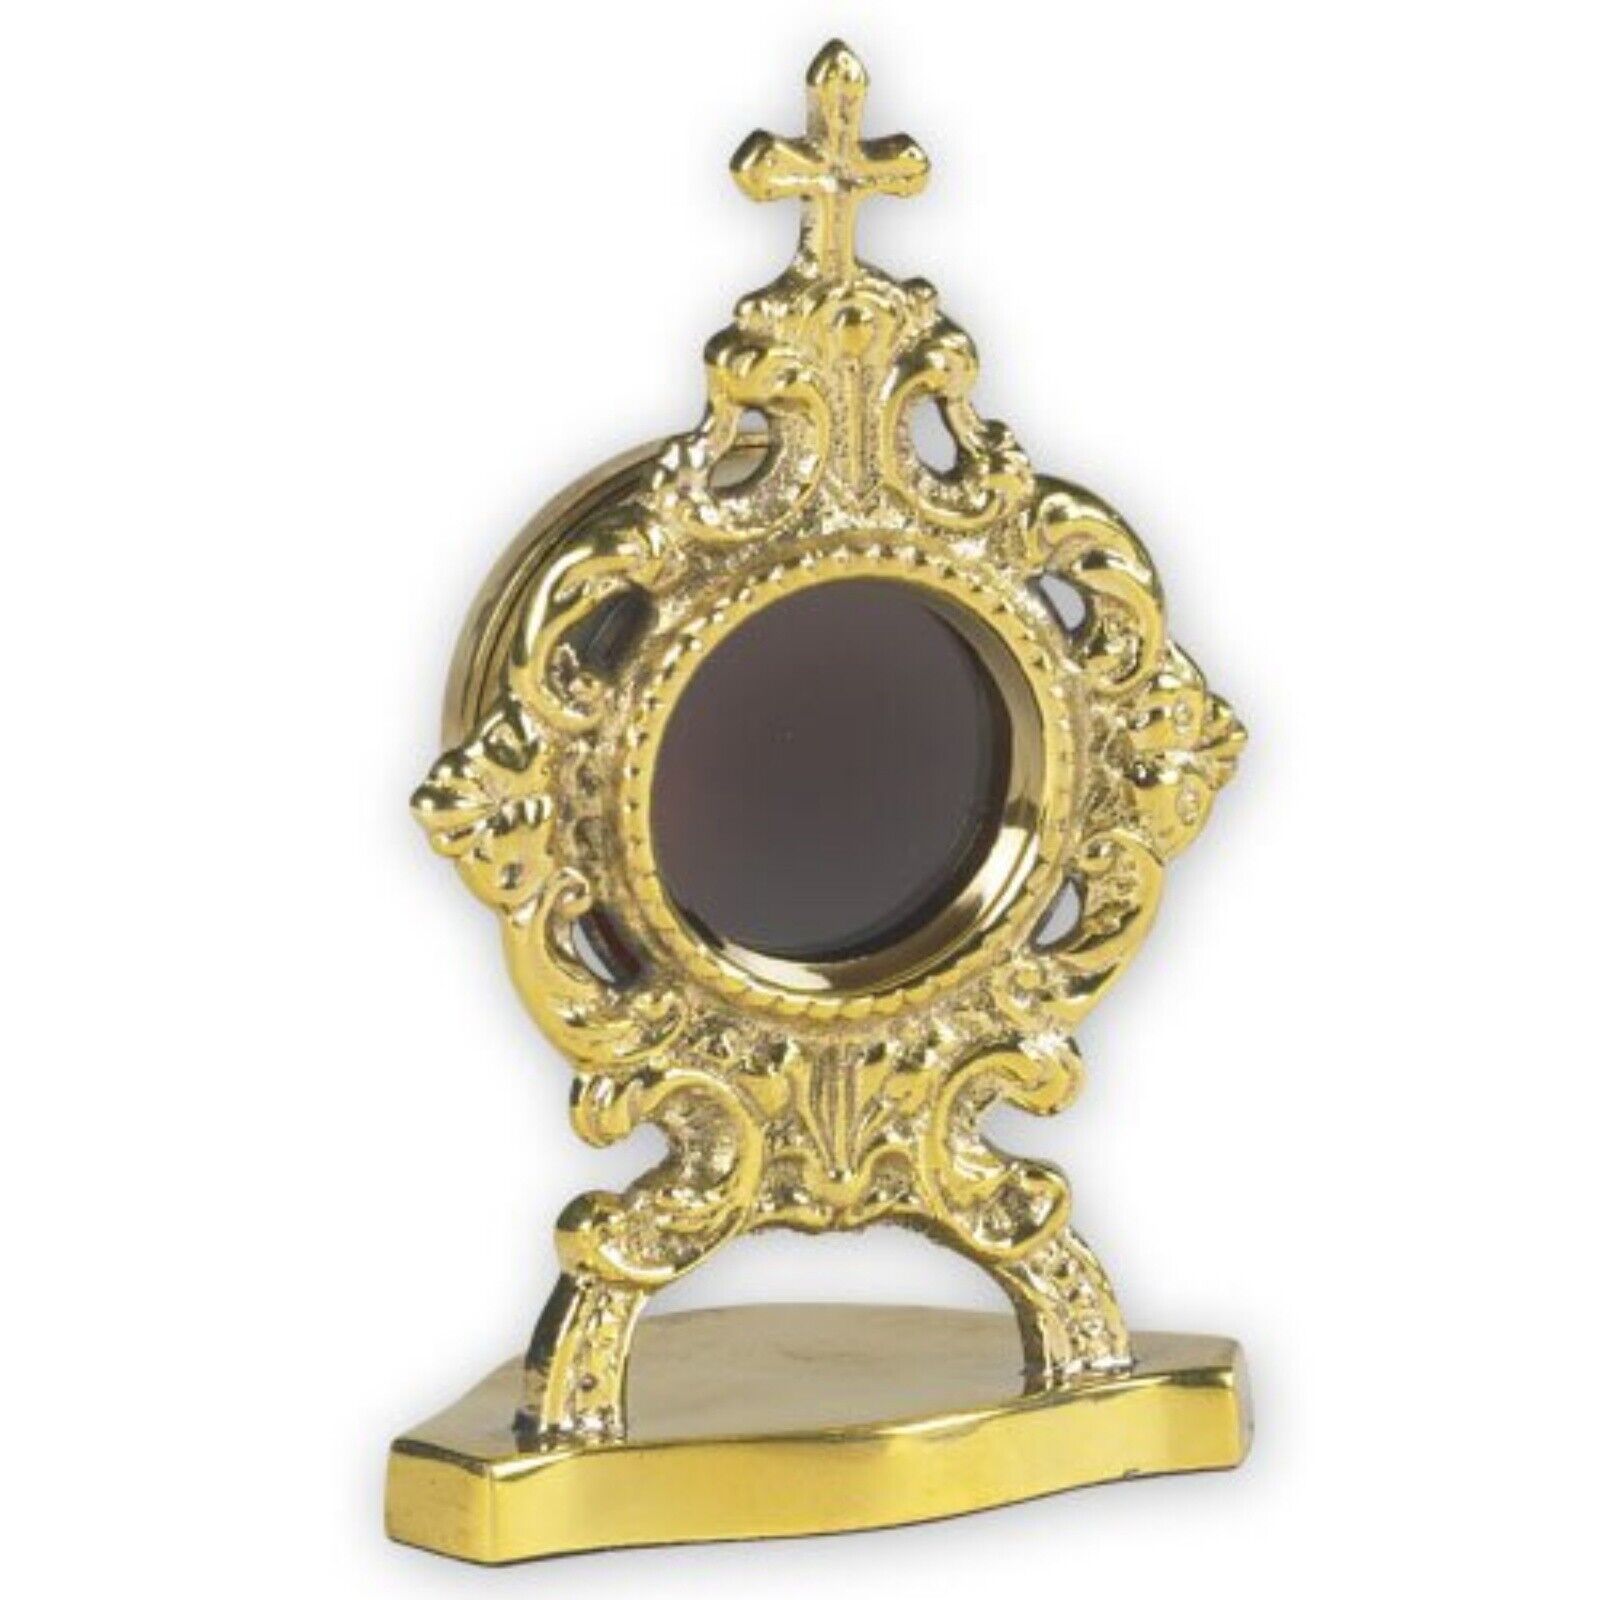 N.G. Brass Small Oval Personal Reliquary Catholic Relic Holder, 3 1/2 Inch